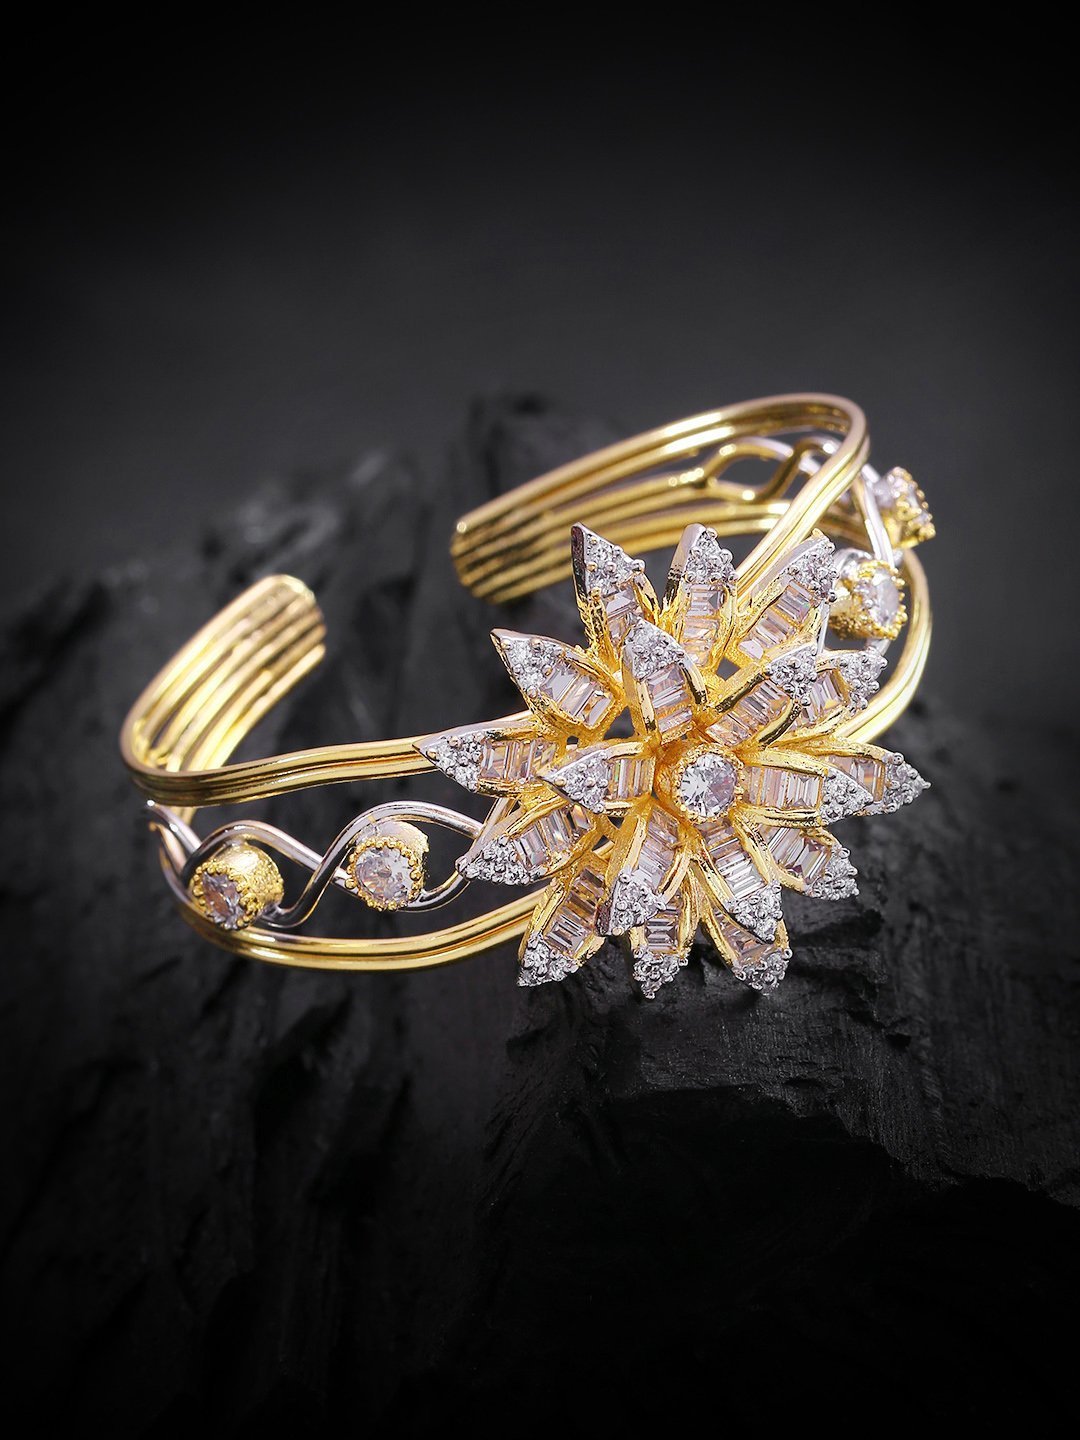 Women's Gold-Plated American Diamond Studded Cuff Bracelet in Floral Pattern - Priyaasi